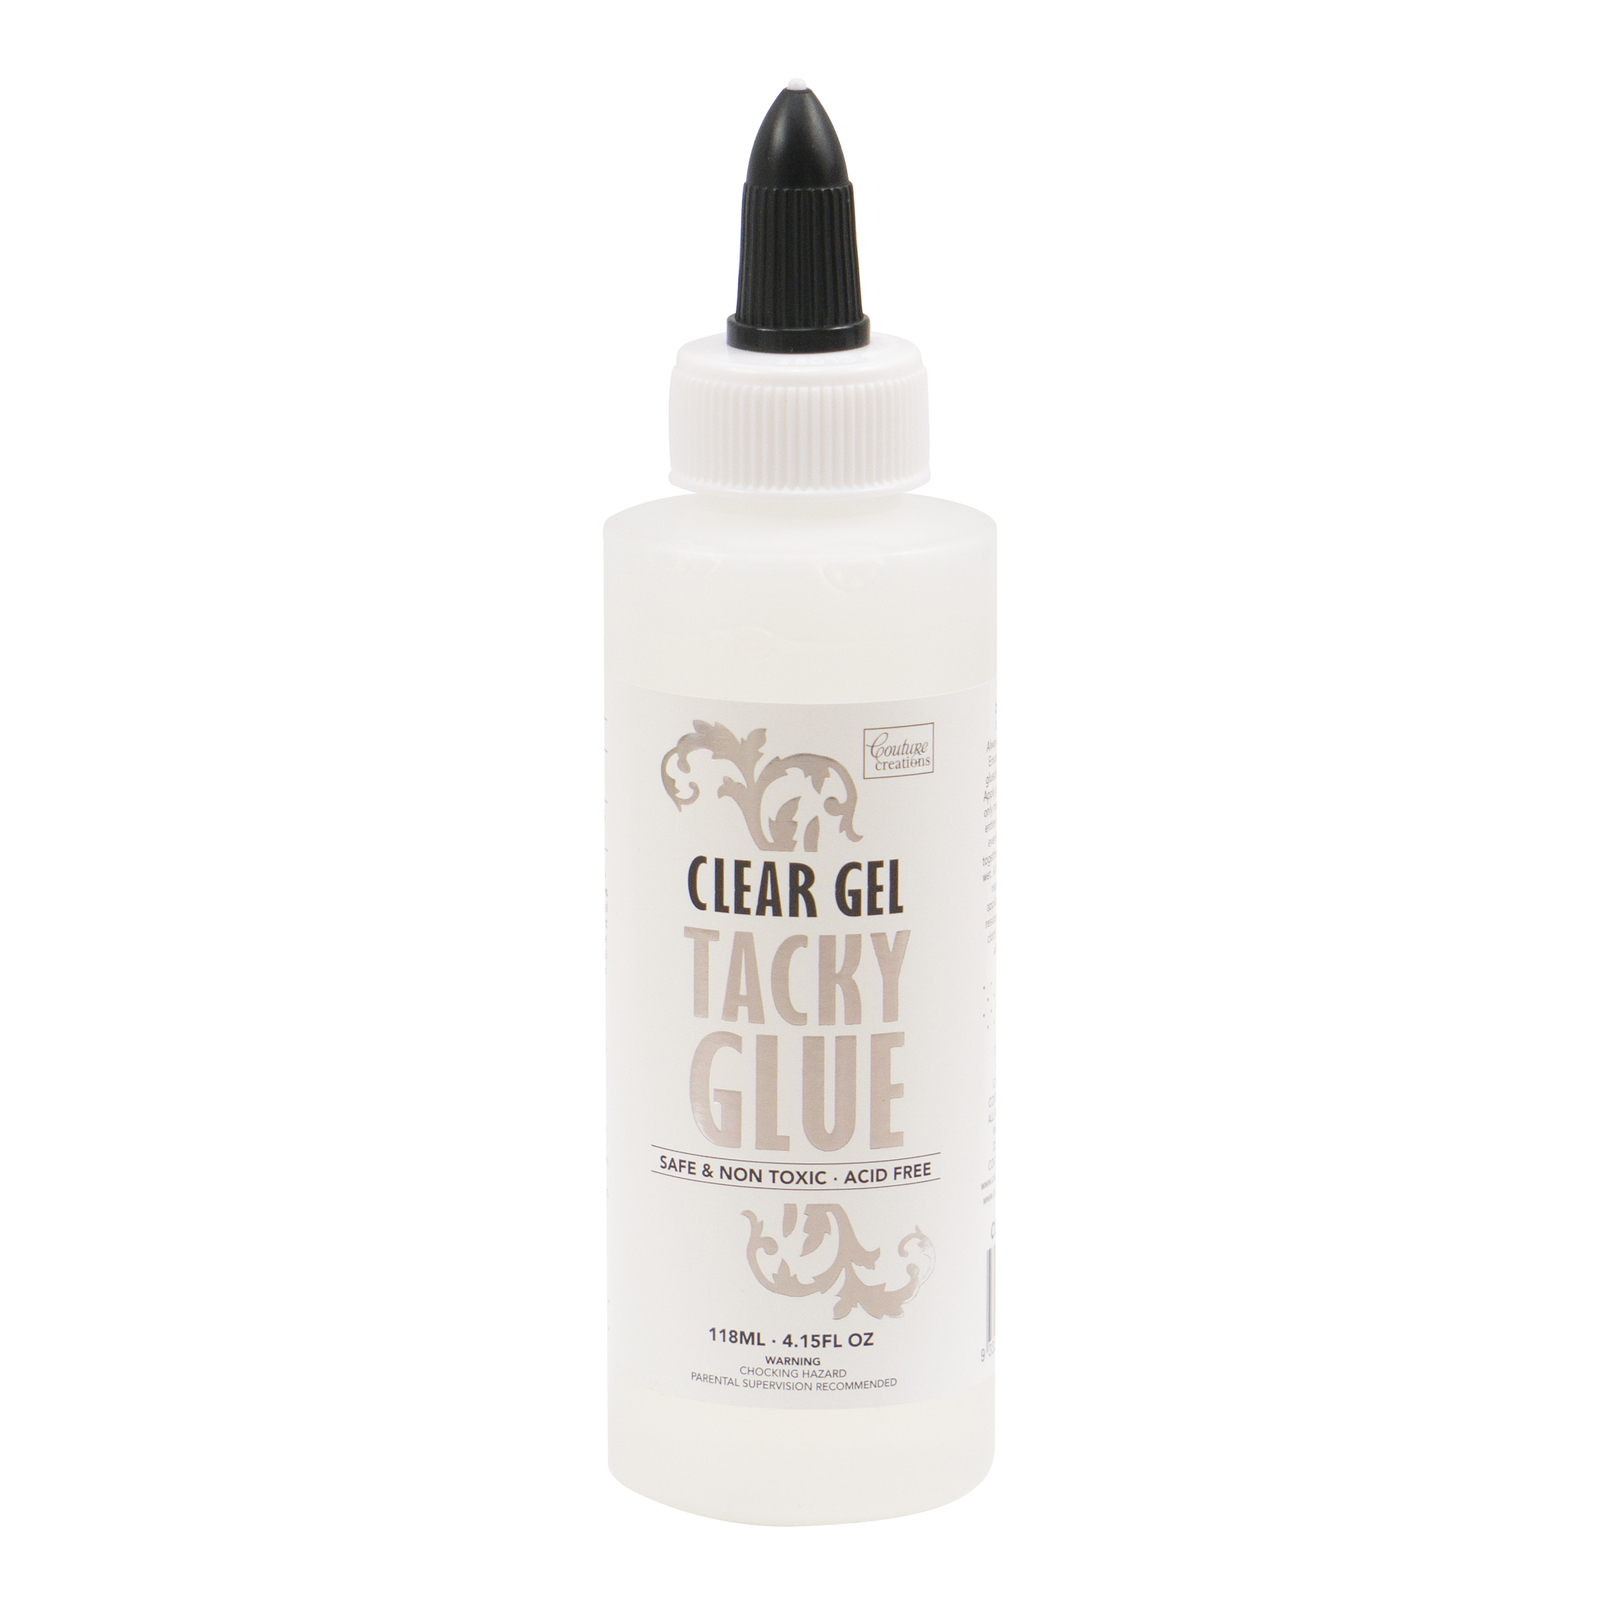 Couture Creations Clear Gel Tacky Glue 118ml